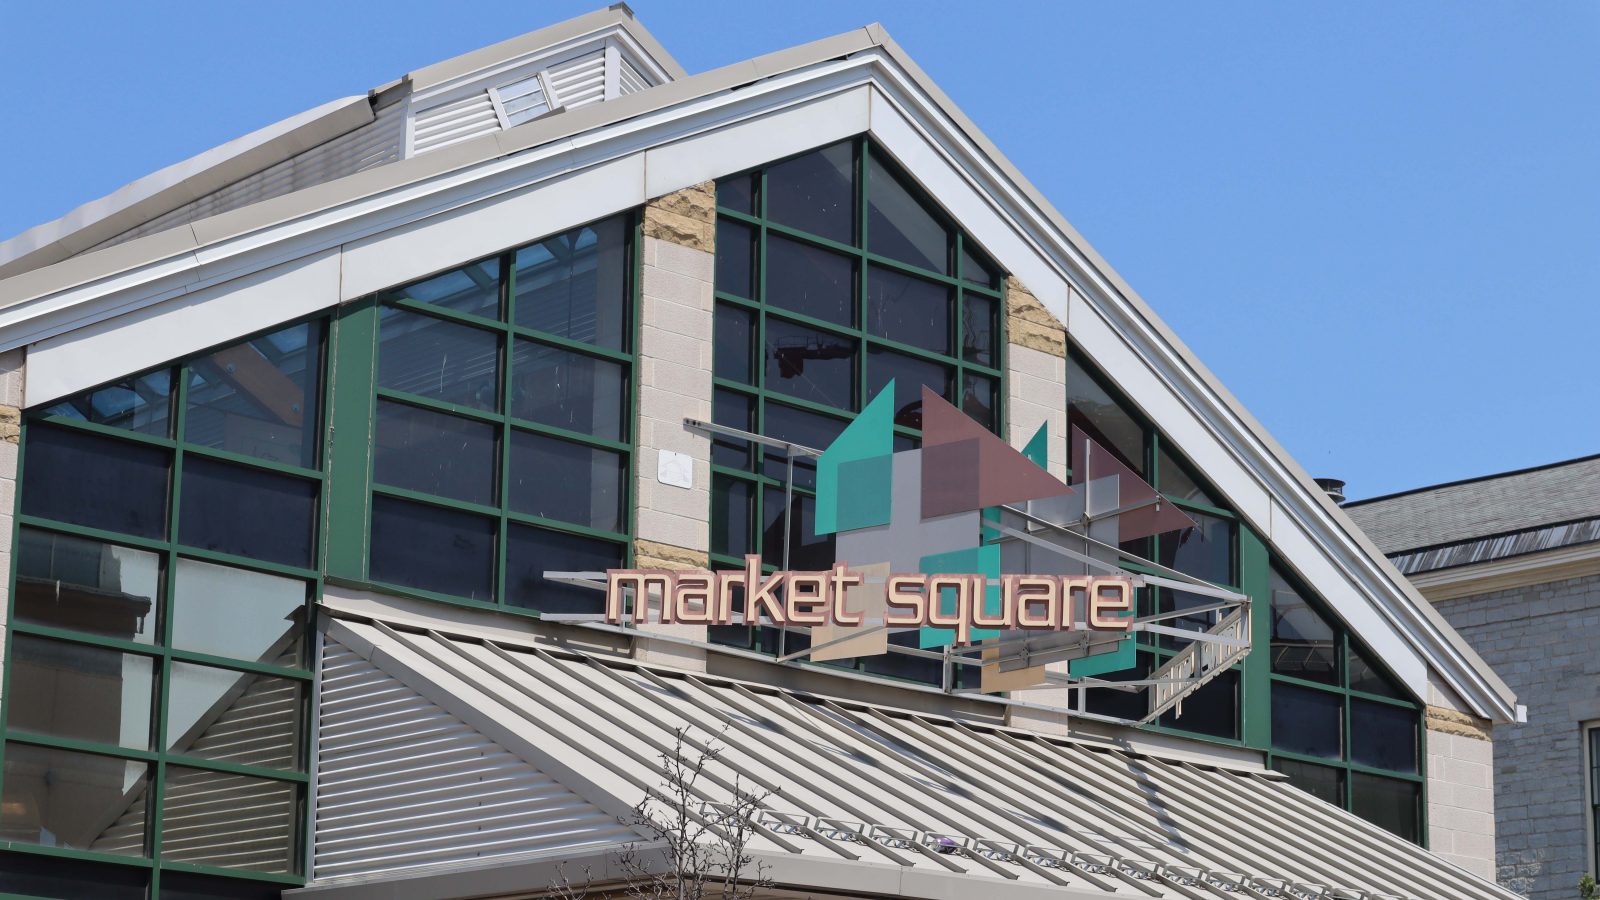 Market Square building in downtown St. Catharines.